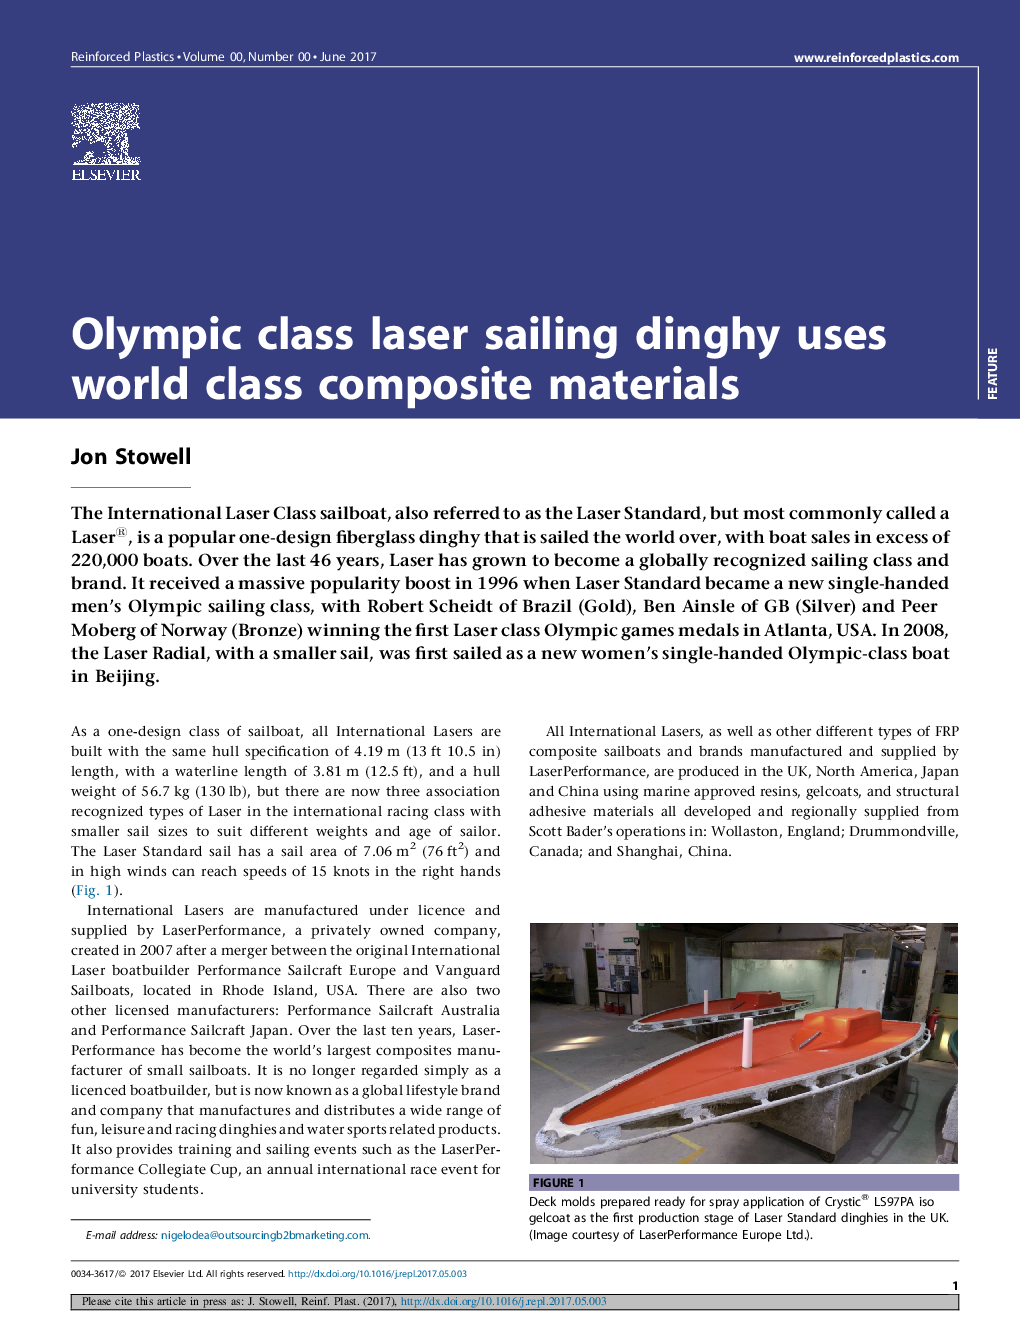 Olympic class laser sailing dinghy uses world class composite materials